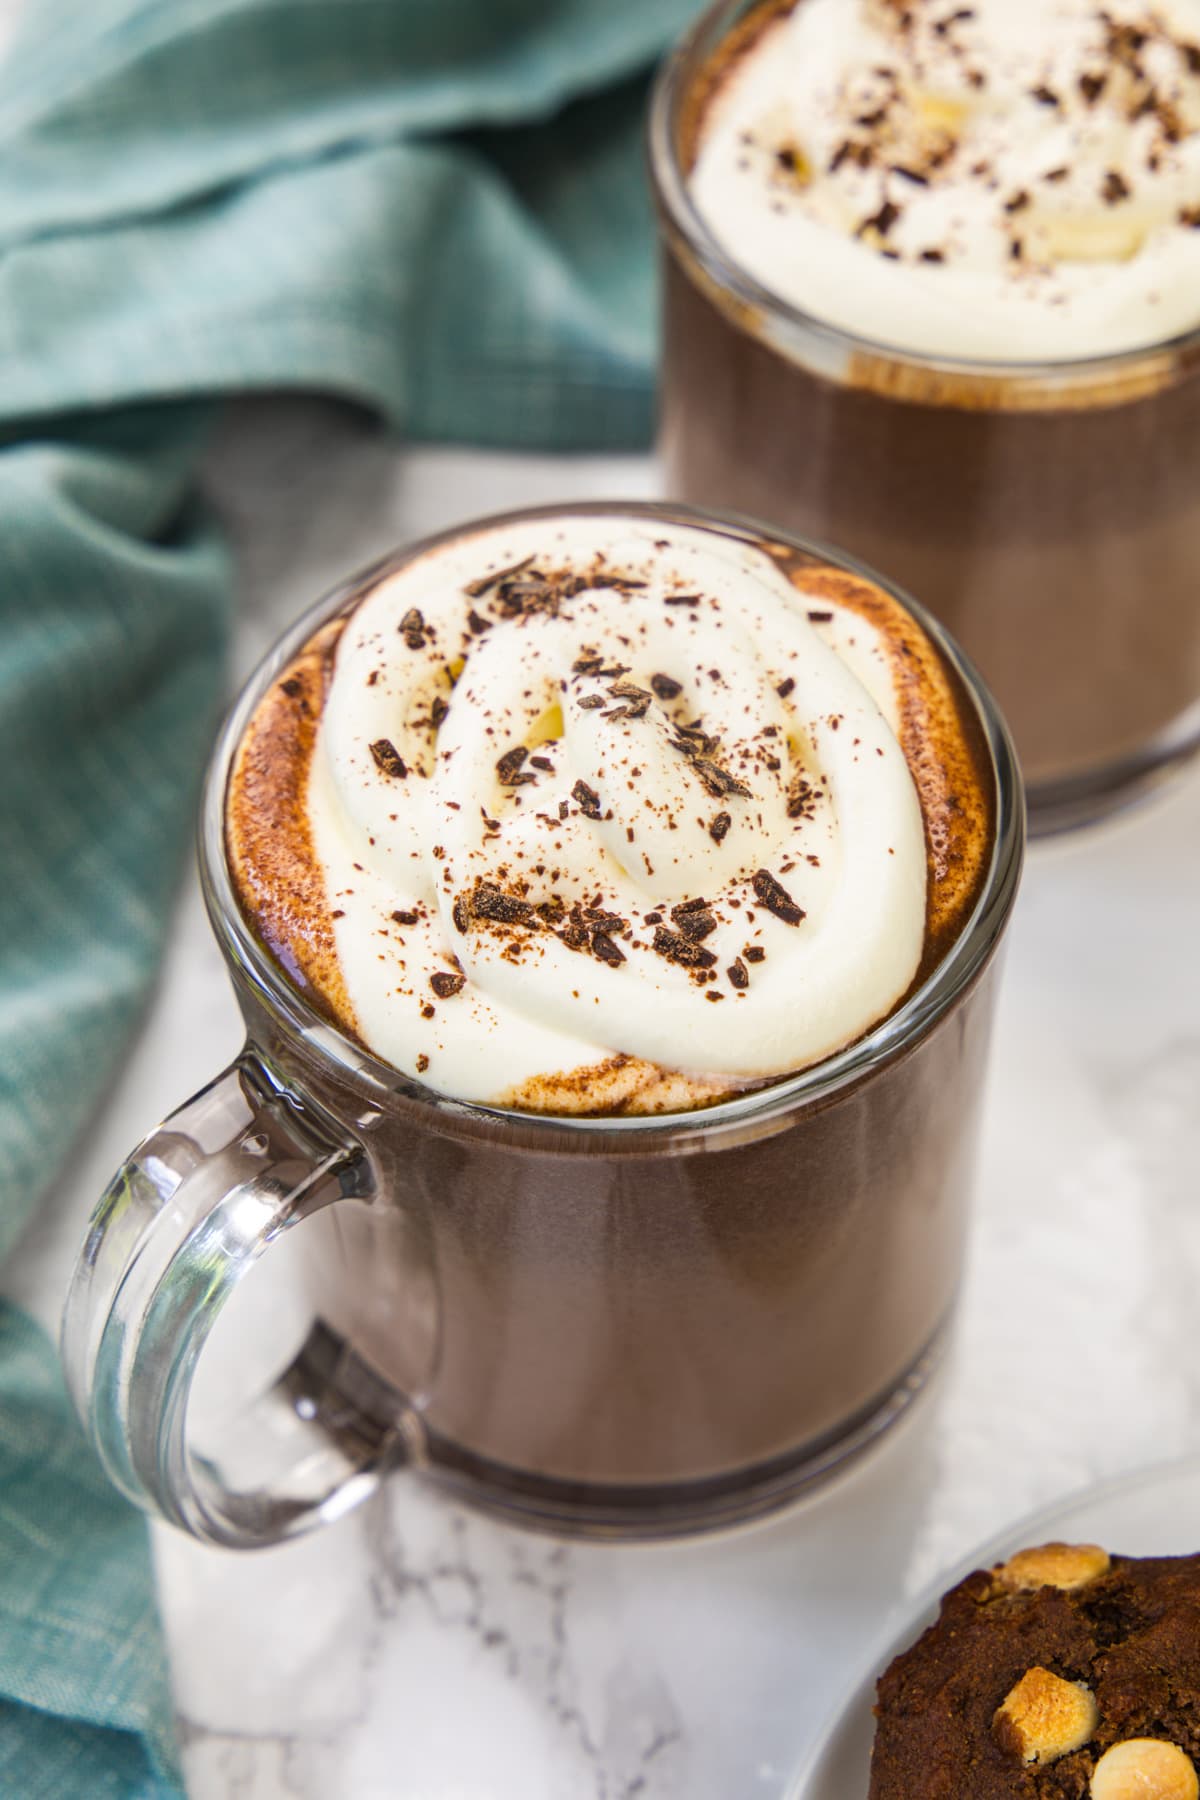 Hot chocolate topped with whipped cream and a dusting on cocoa powder.